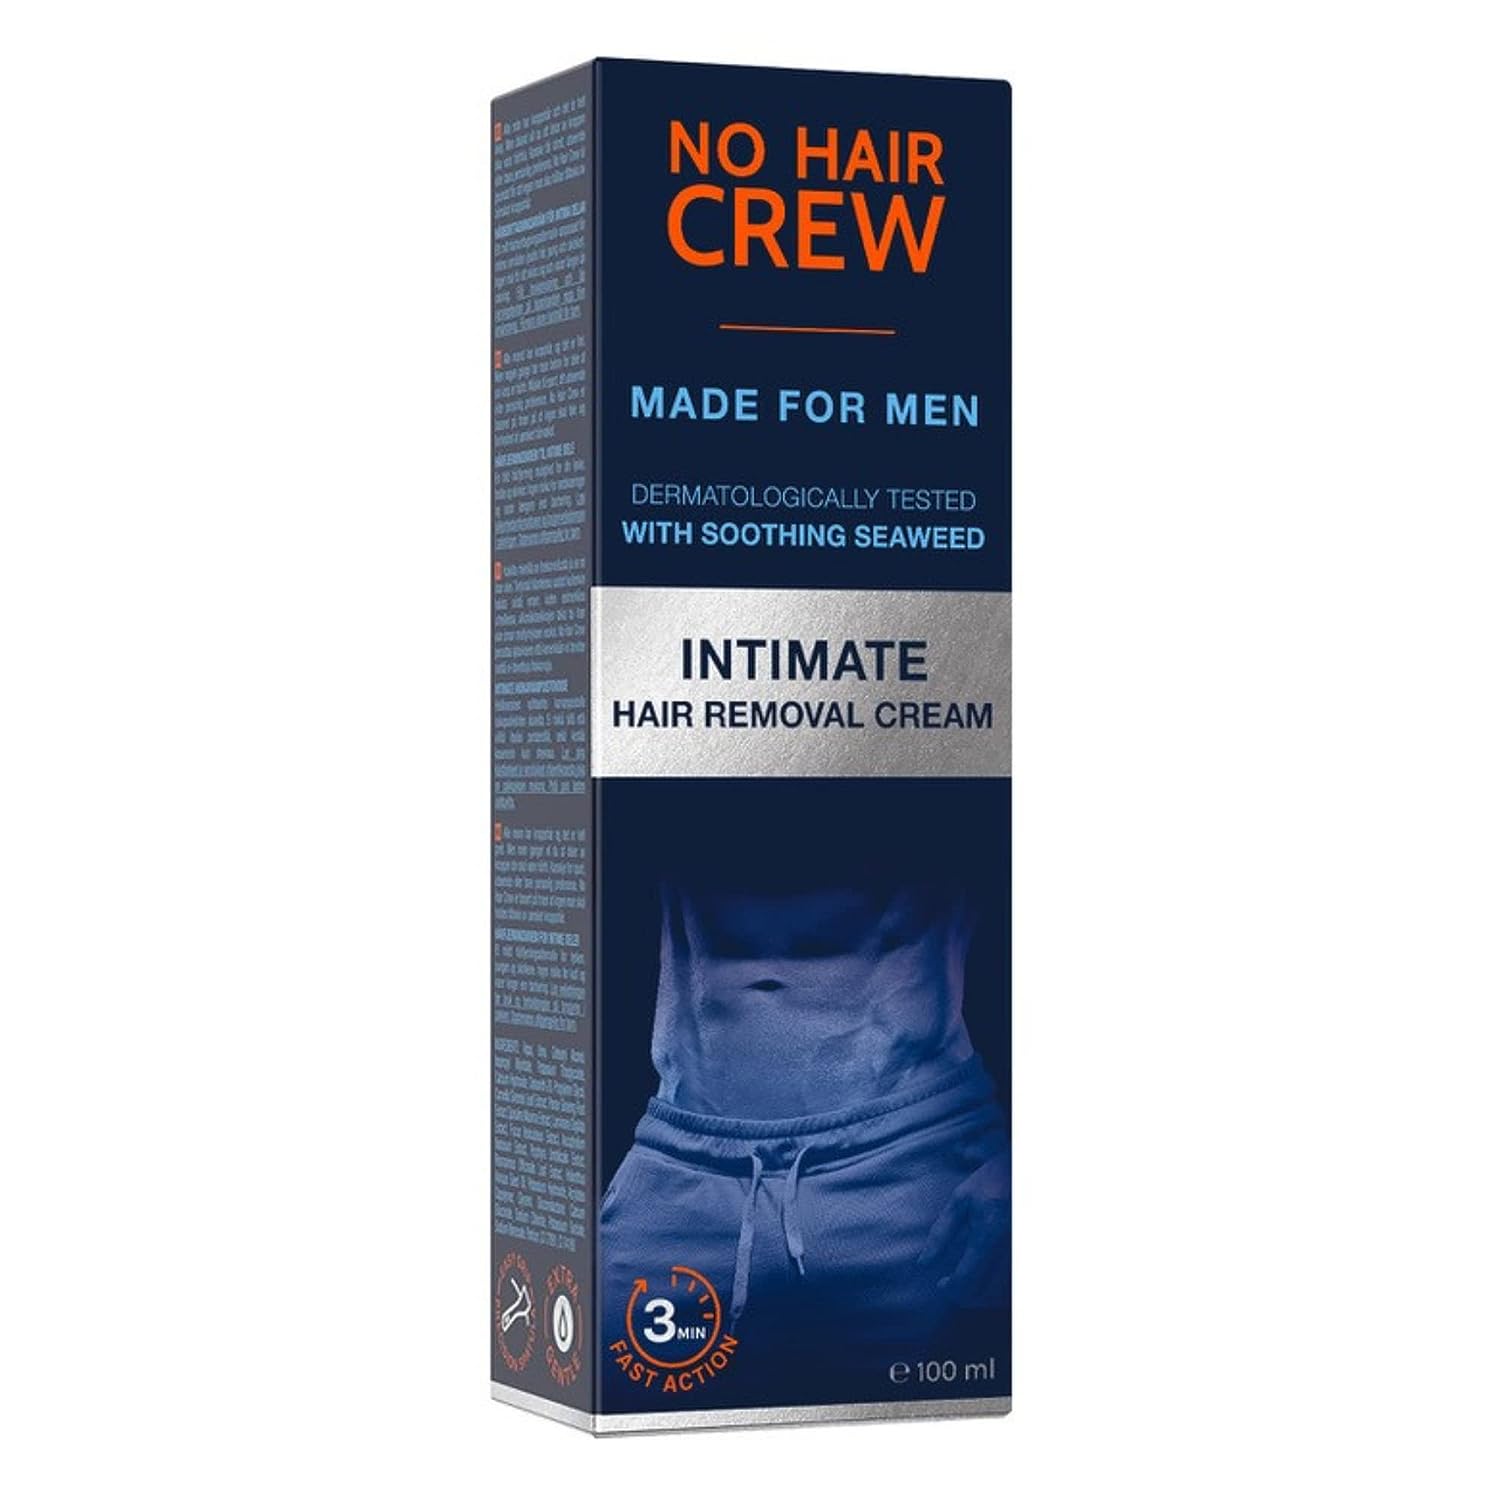 No Hair Crew Intimate Private At-Home Hair Removal Cream